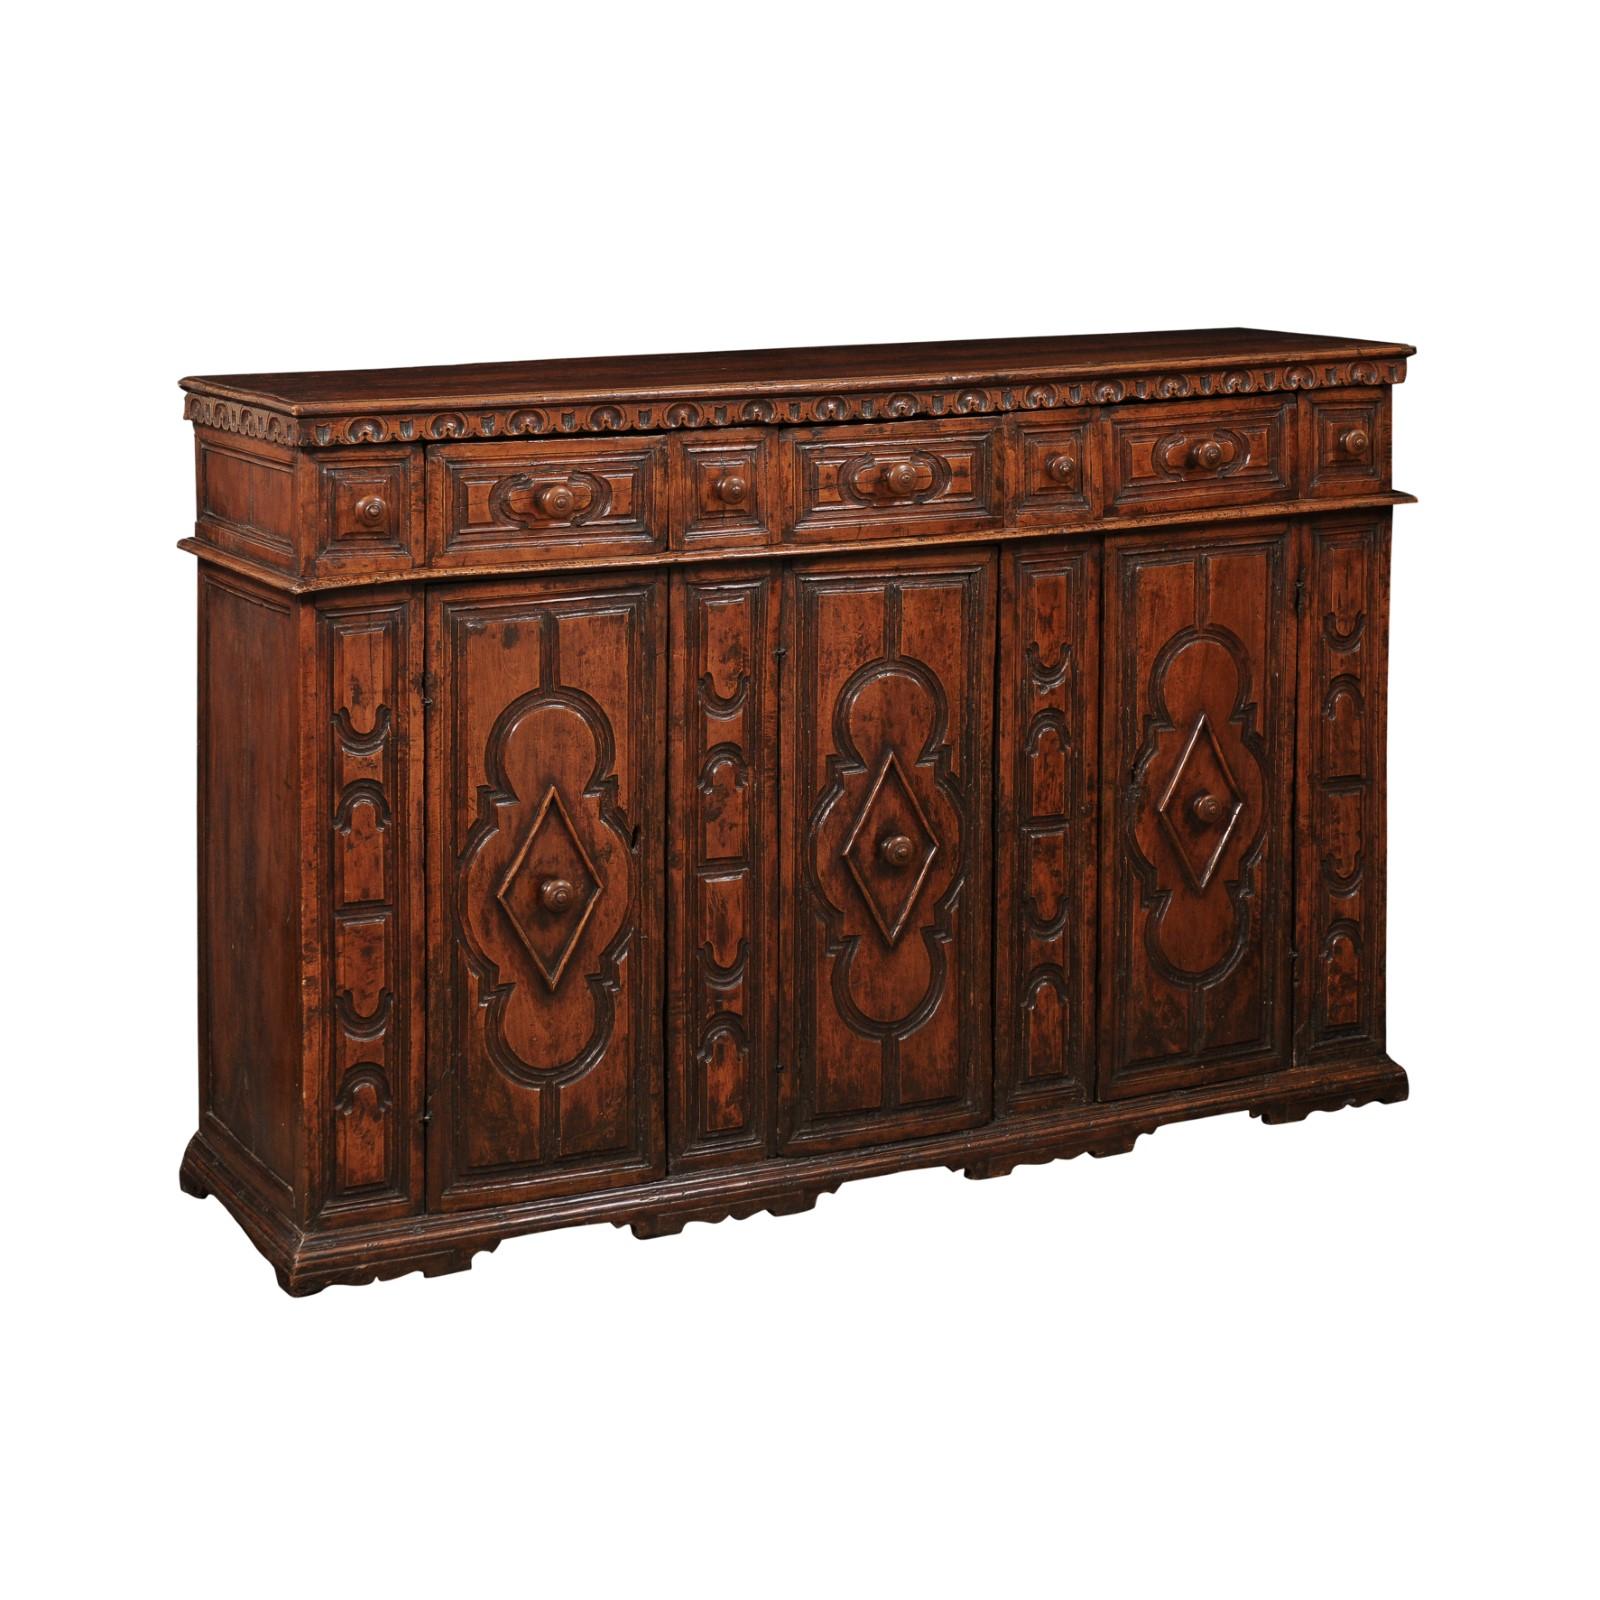 17th Century Italian Walnut Credenza with 3 Doors and 7 Drawers.